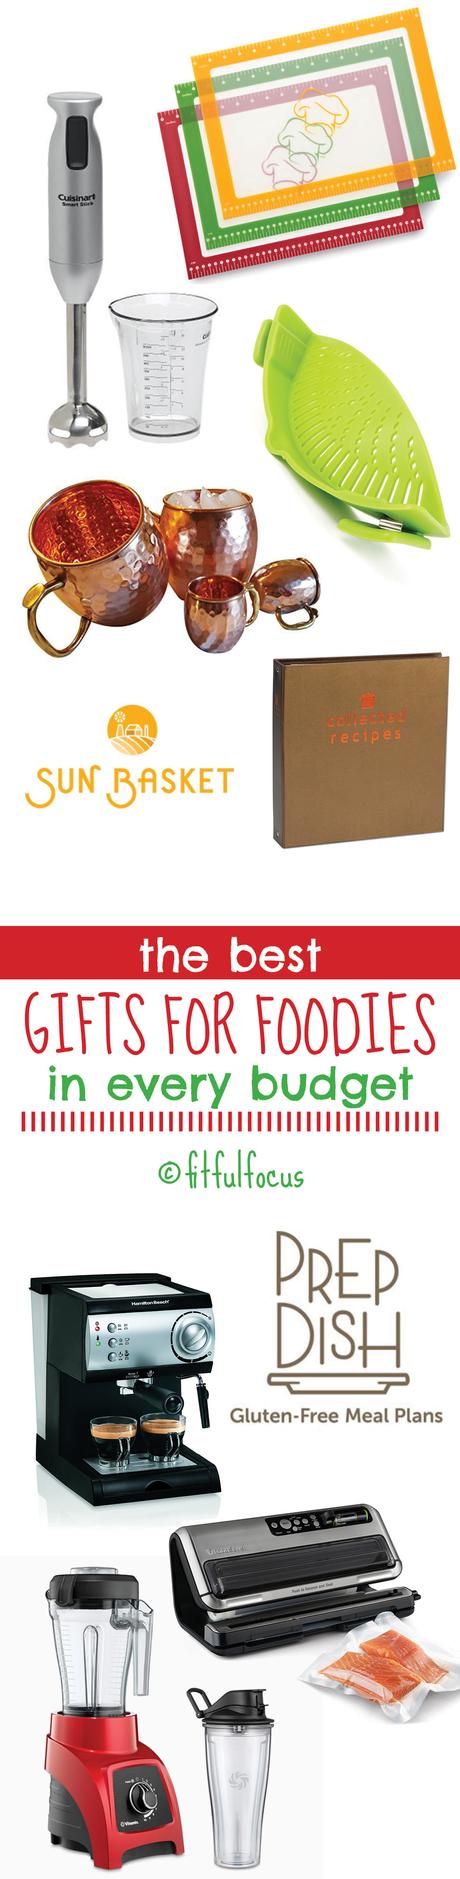 The Best Gifts For Foodies In Every Budget